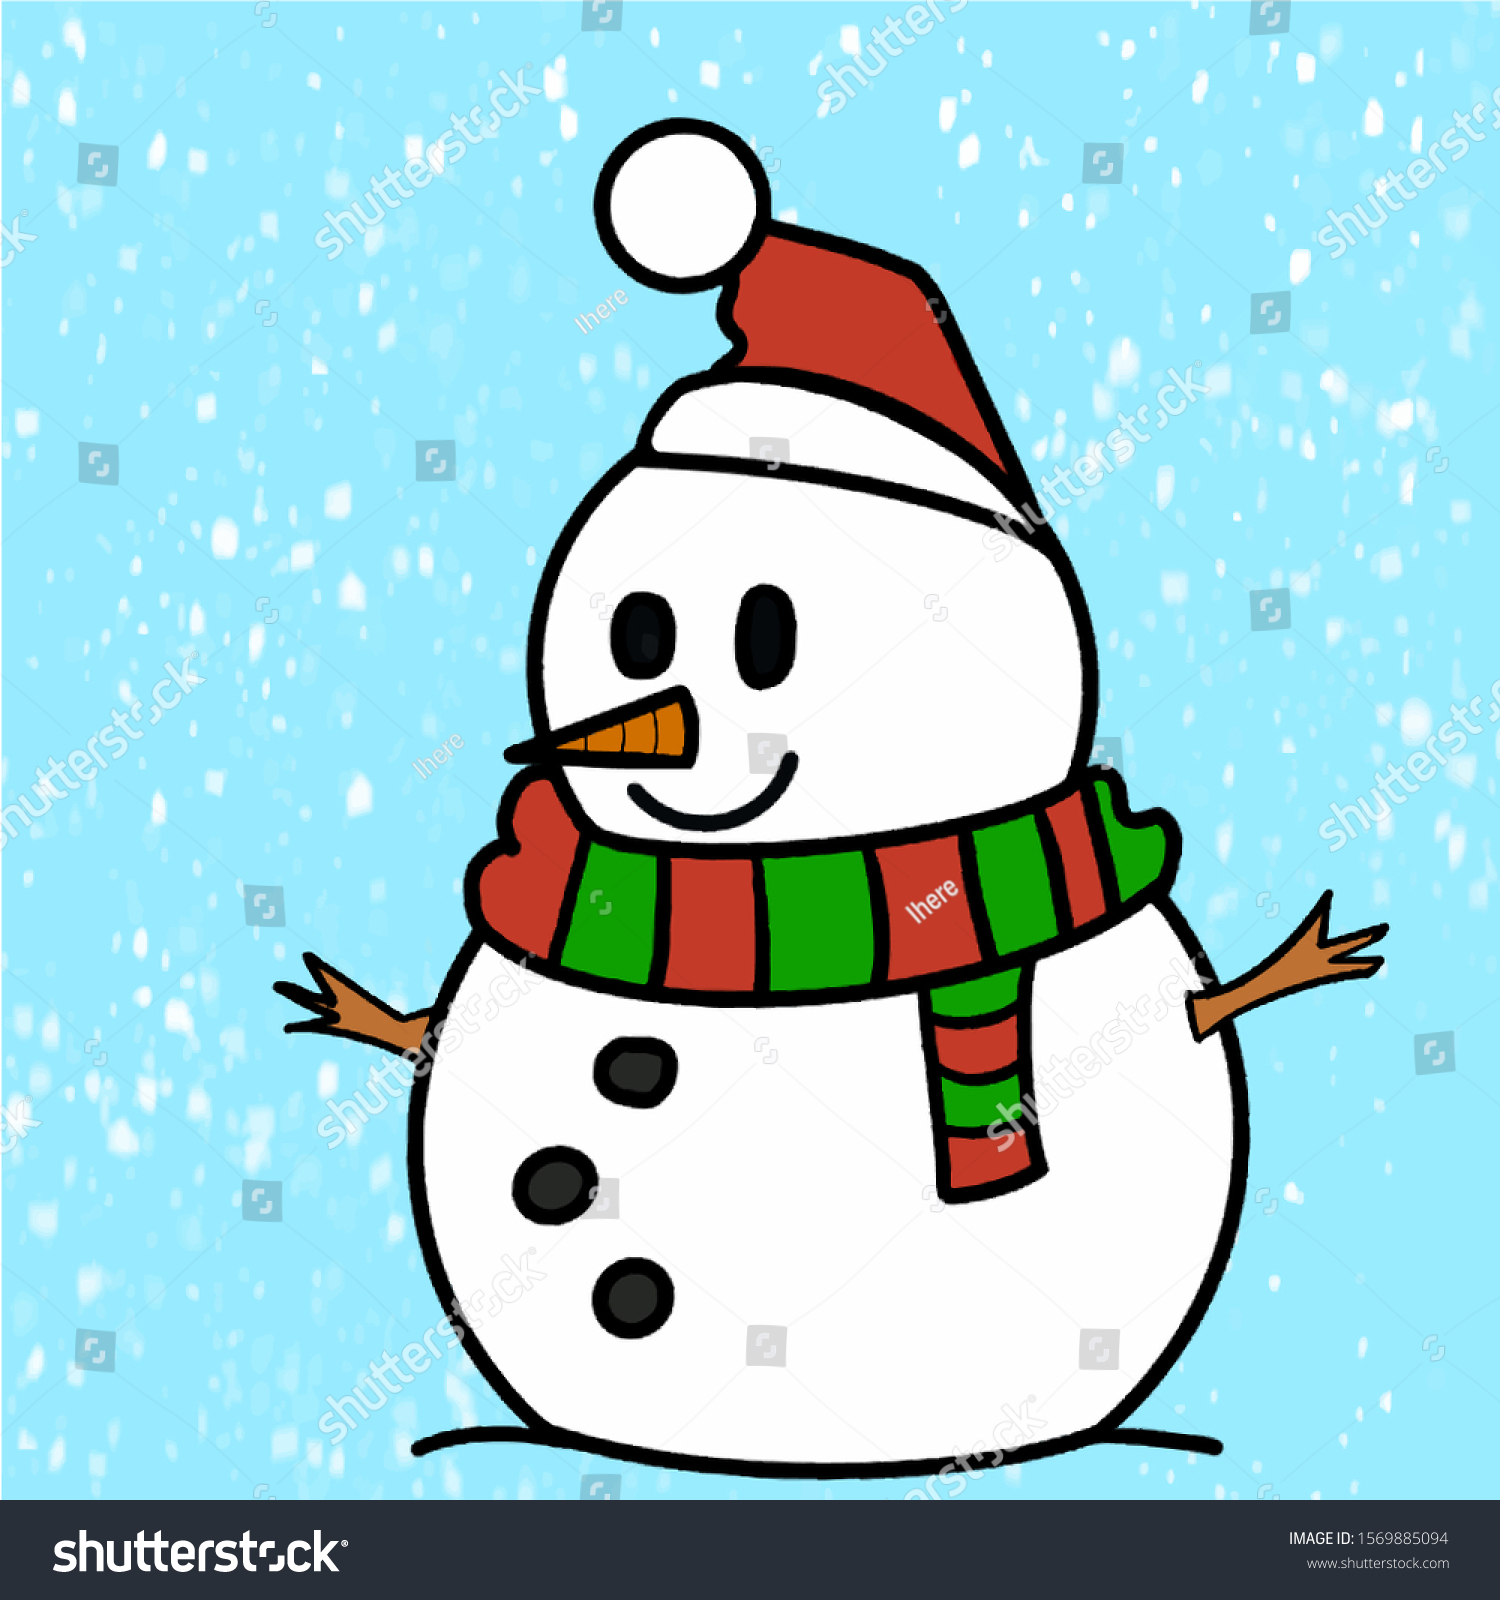 Snowman Smiling Emotion Vector Kid Hand Stock Vector Royalty Free 1569885094